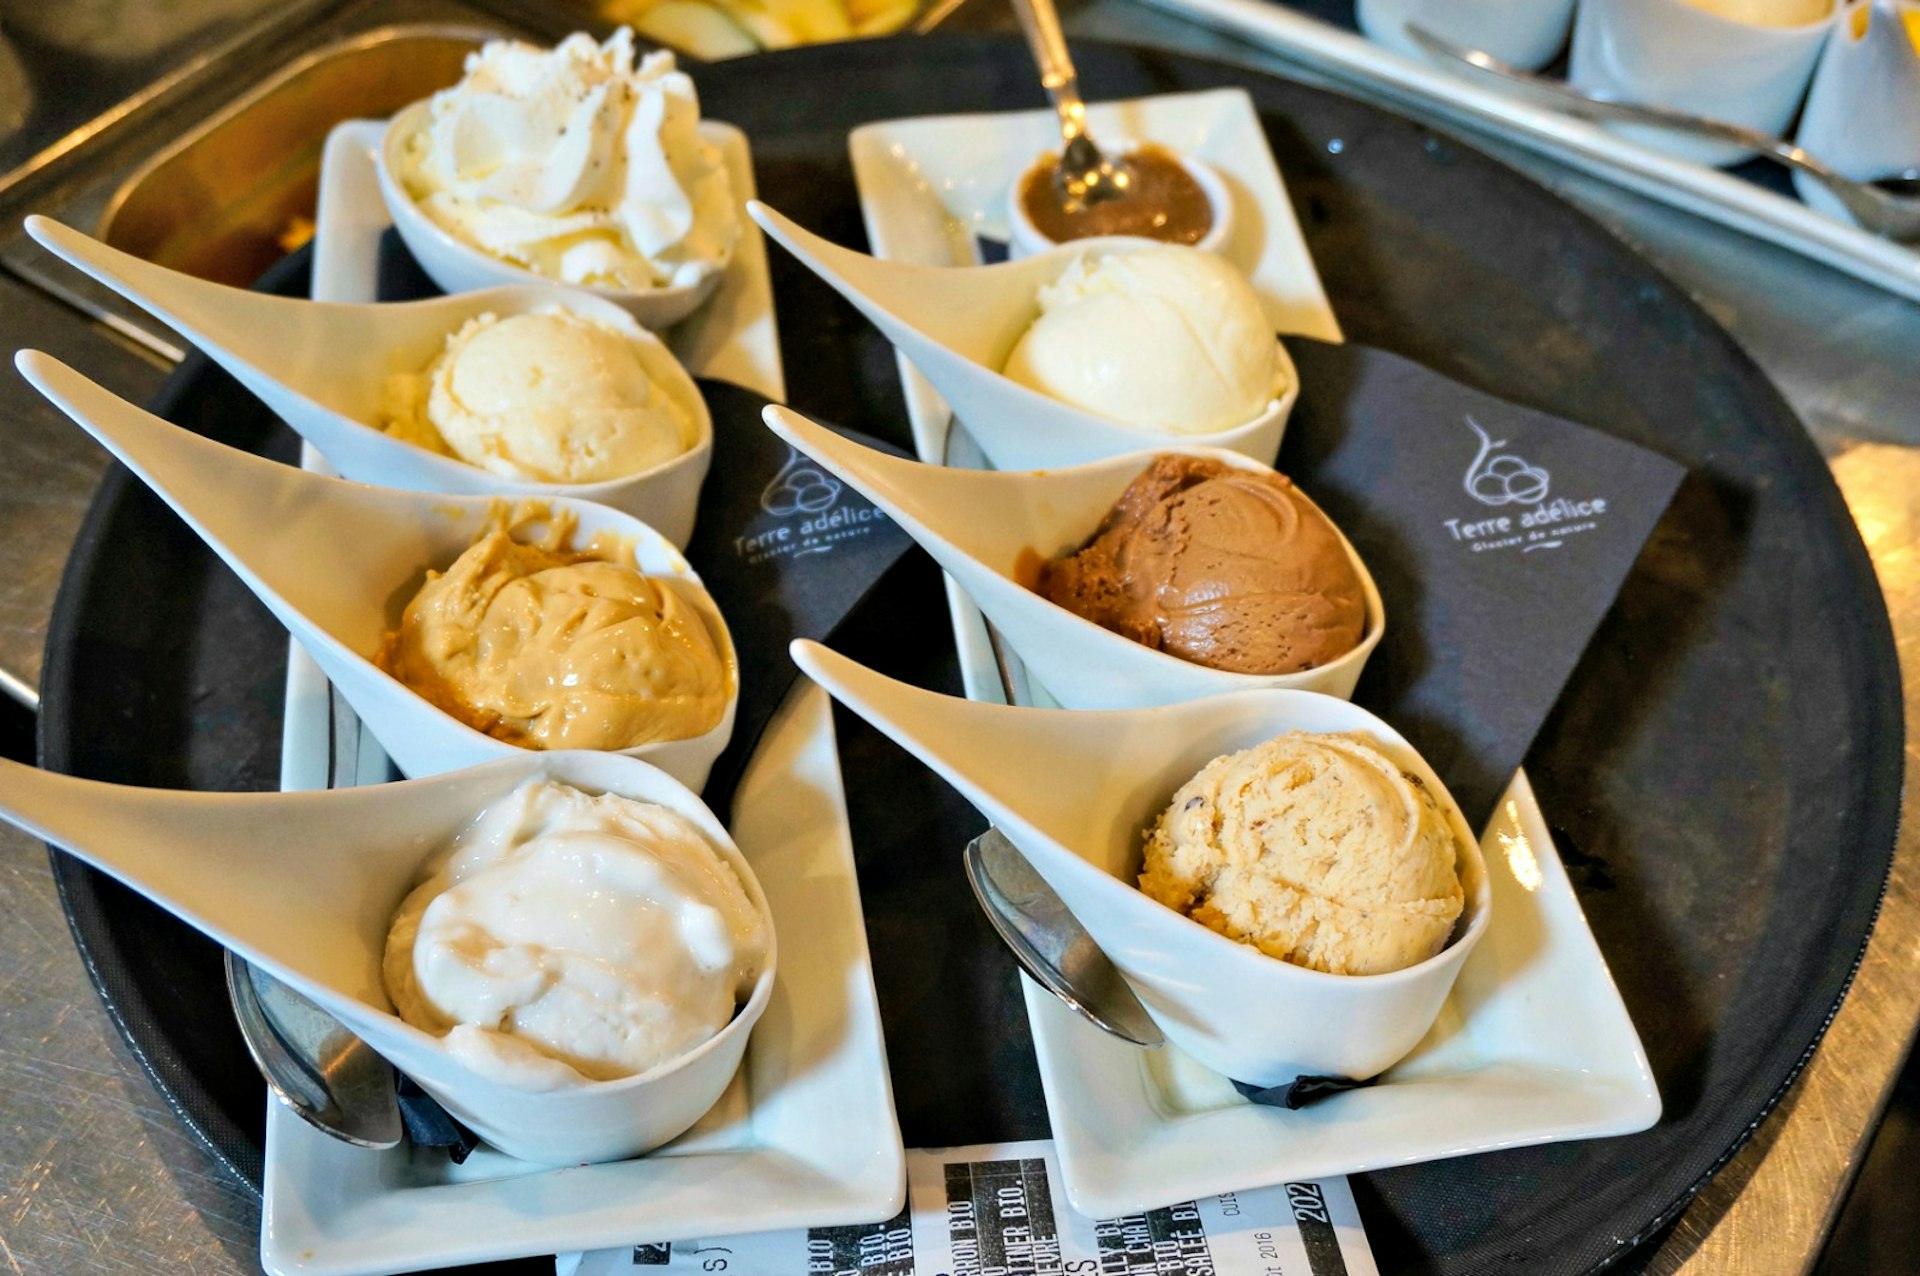 Each ice cream scoop is served in a single, white china spoon at Terre Adélice. Image © Monica Suma / Lonely Planet